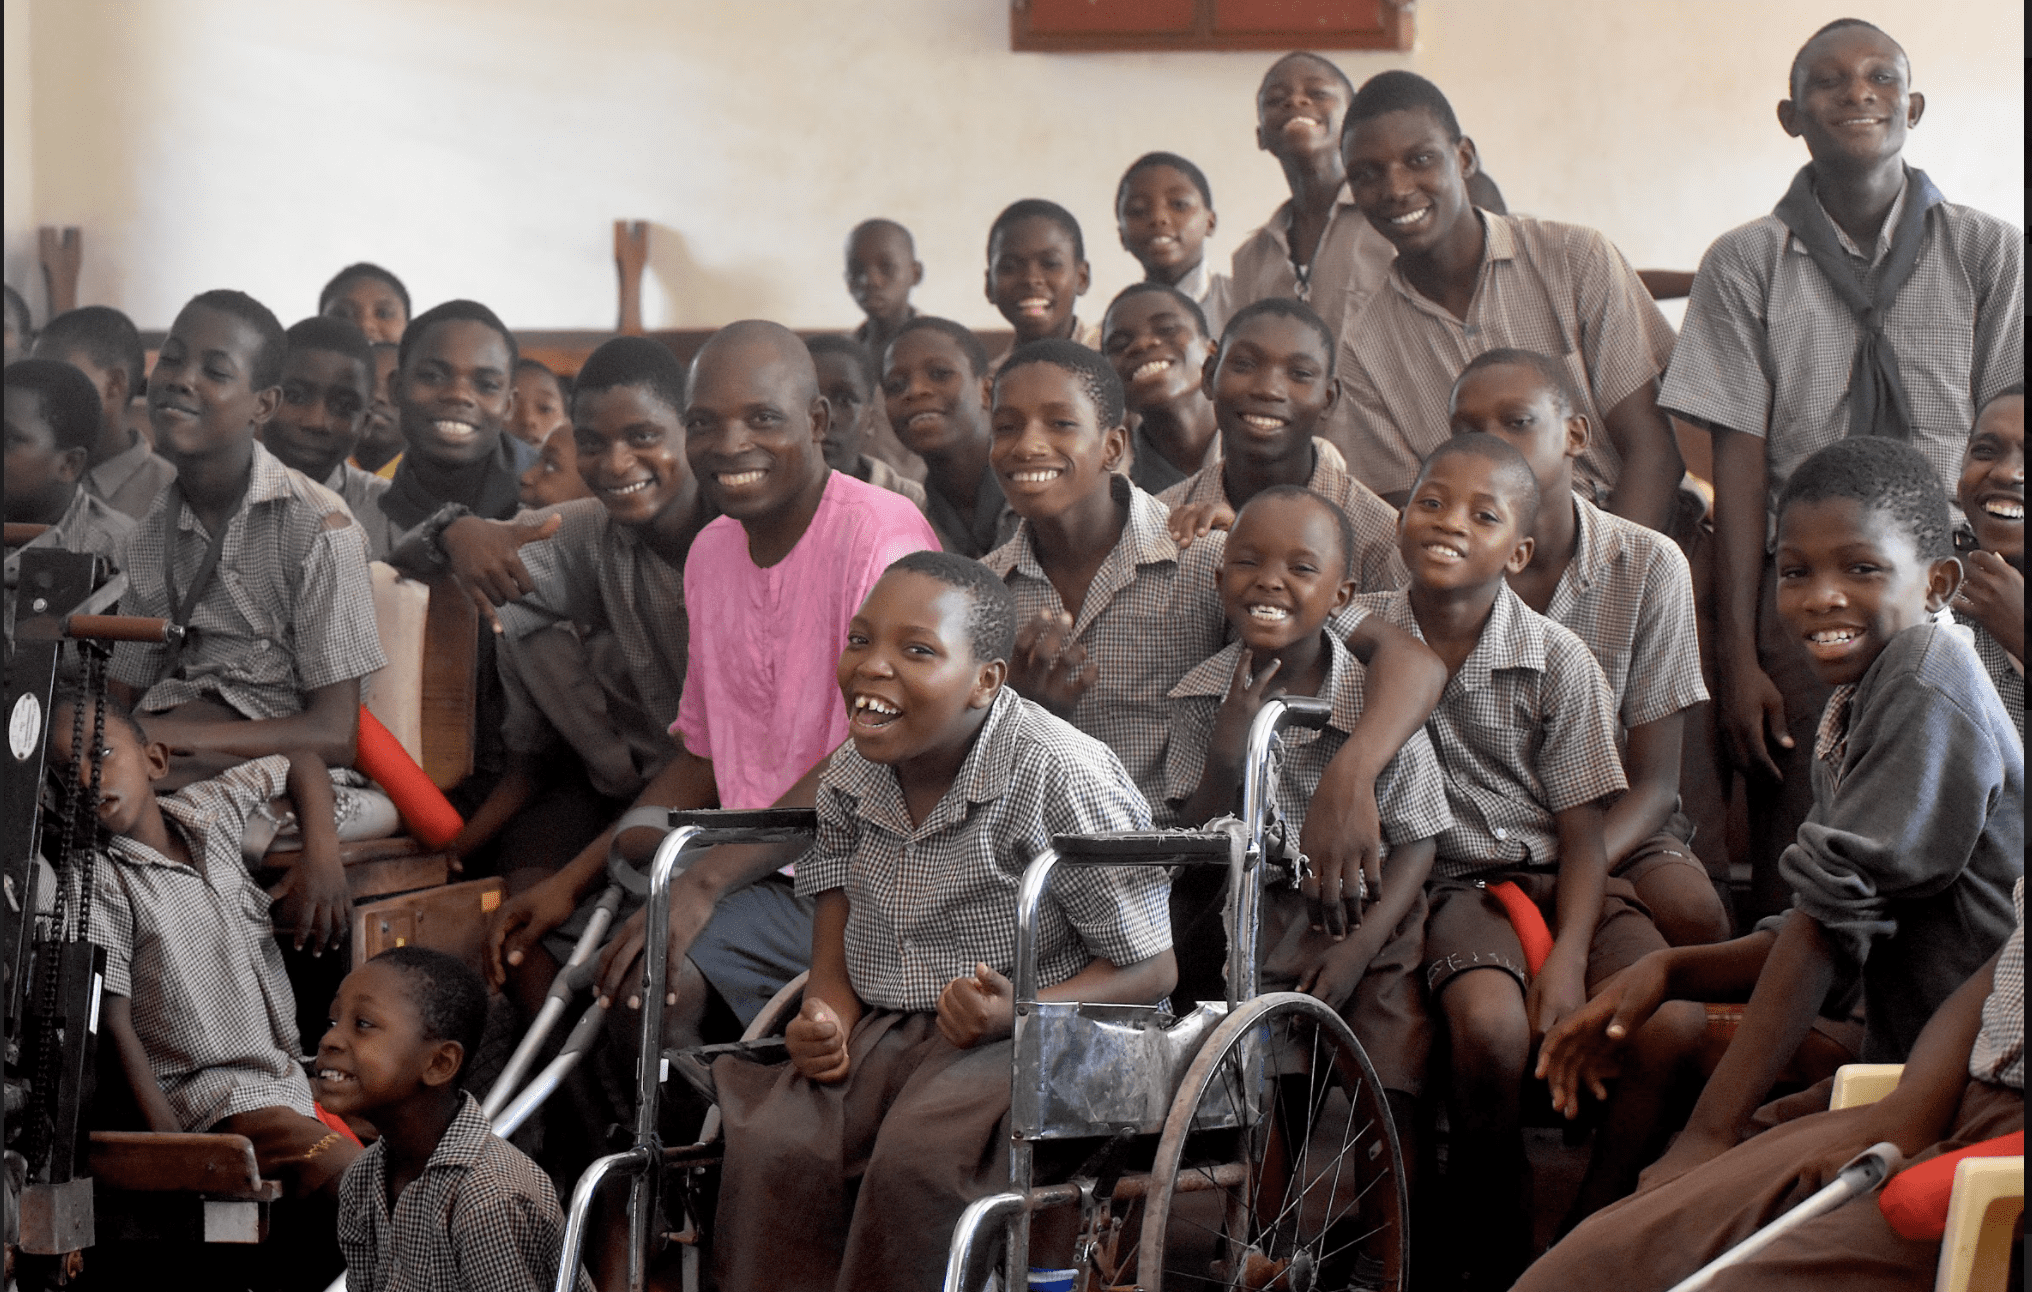 A group of Kenyan school boys seated together and smiling.